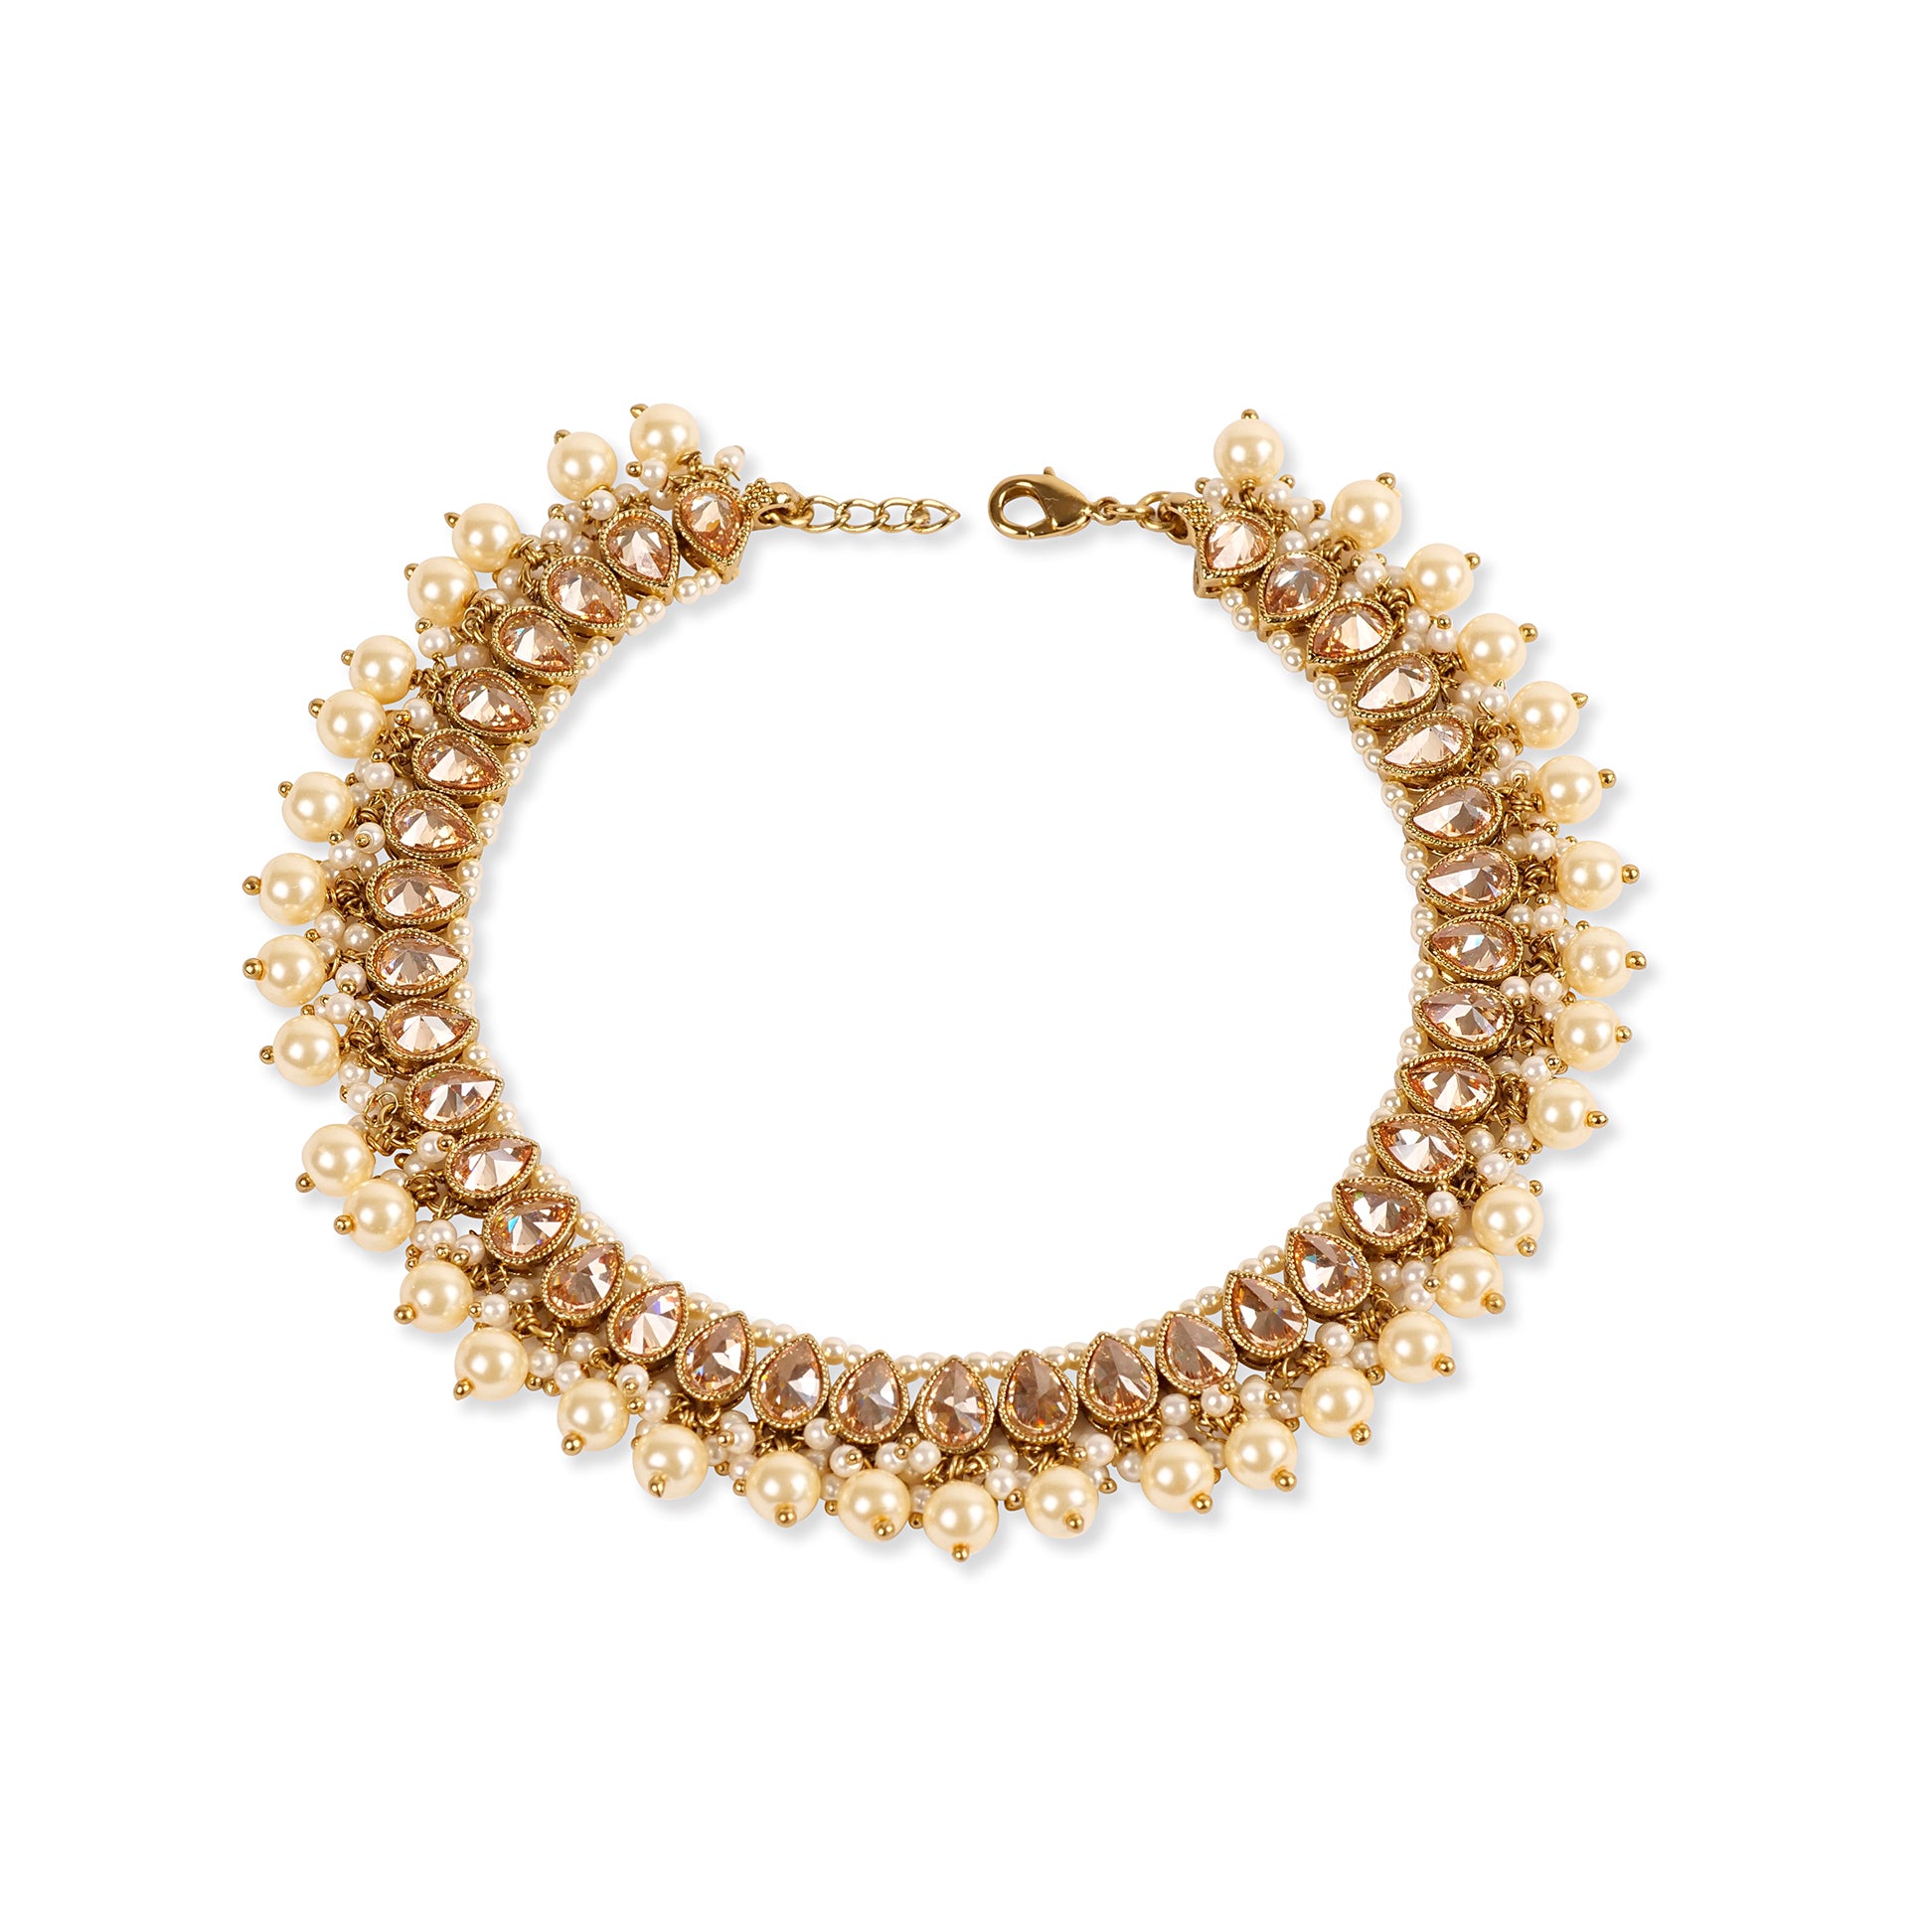 Hiral Pearl Anklet in Antique Gold